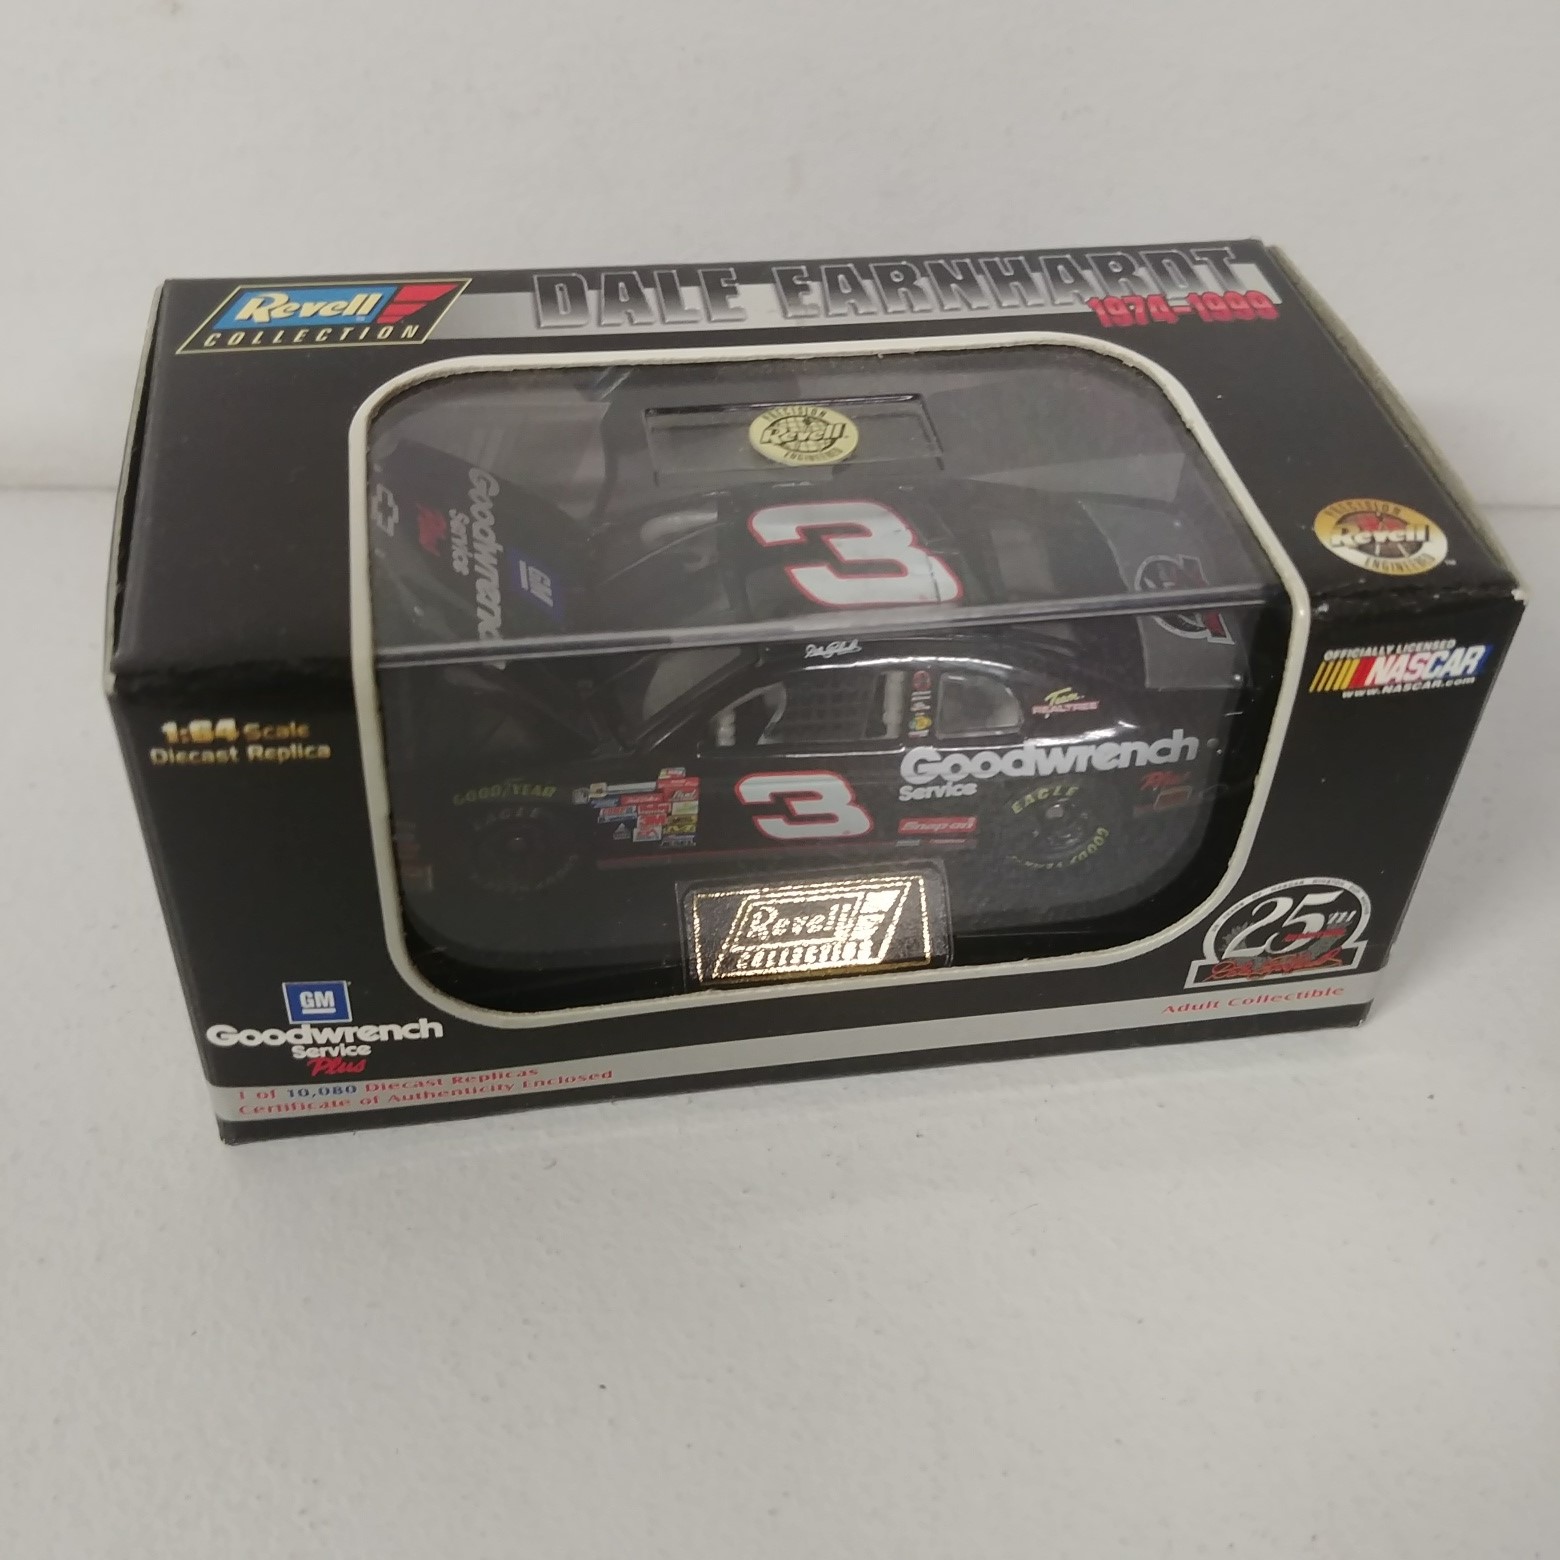 1999 Dale Earnhardt 1/64th GM Goodwrench "25th Annivesary" hood open Monte Carlo